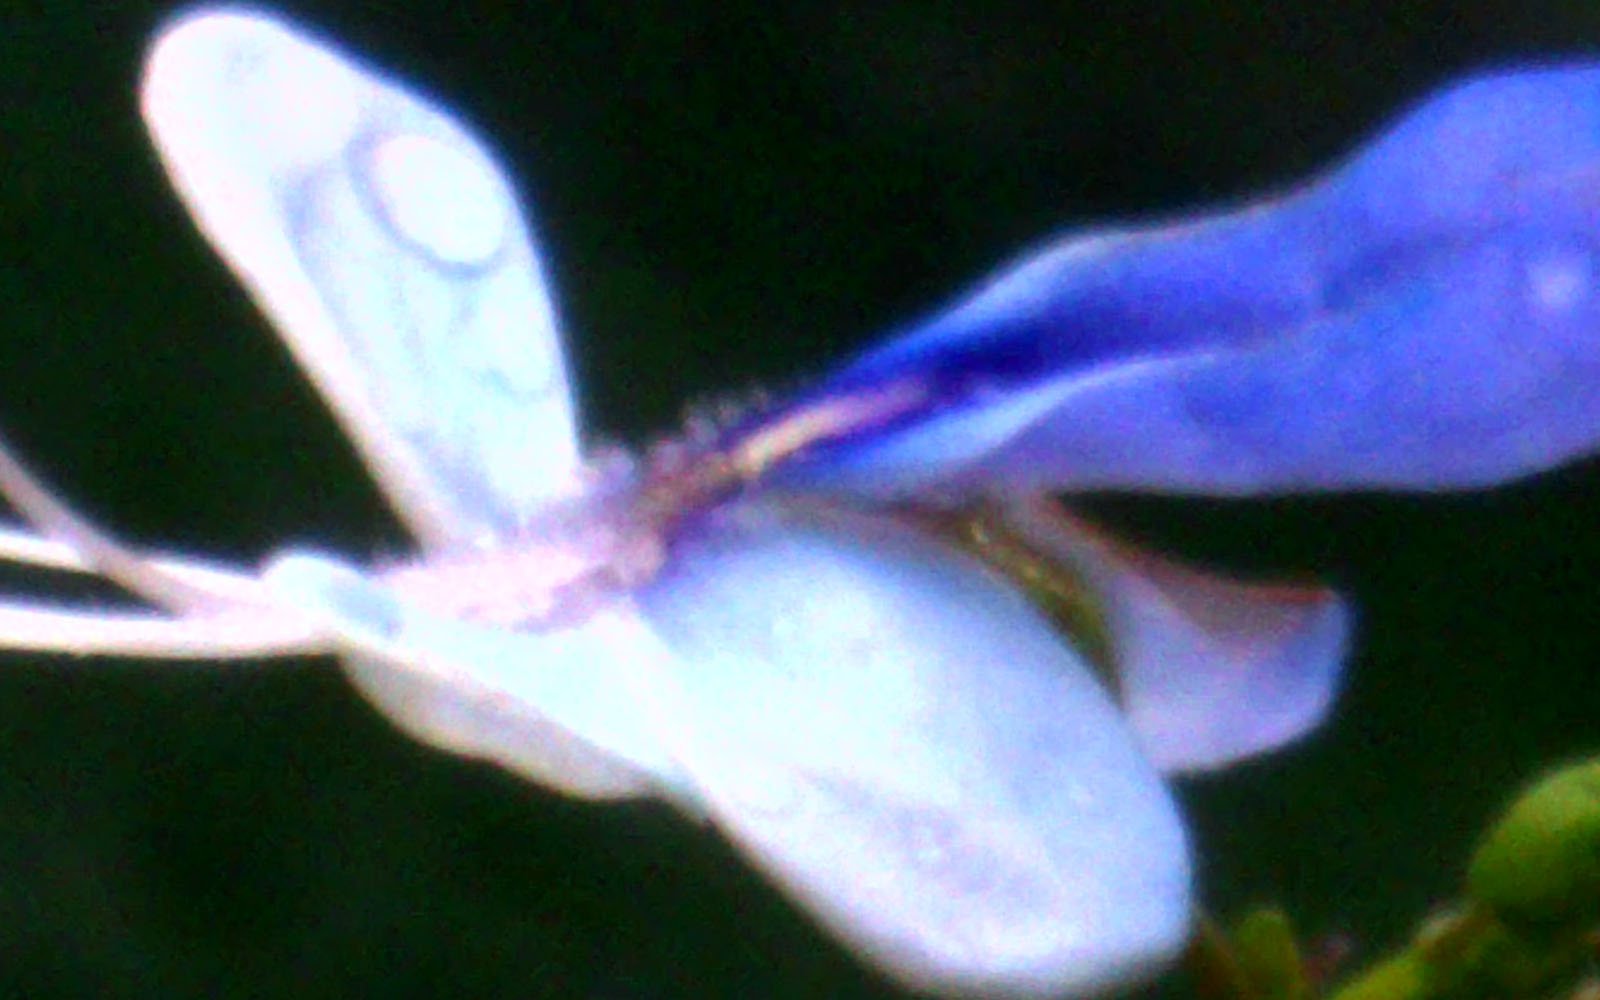 A close-up, blurry image of a blue and white flower with visible delicate petals and a prominent stamen, set against a dark background.